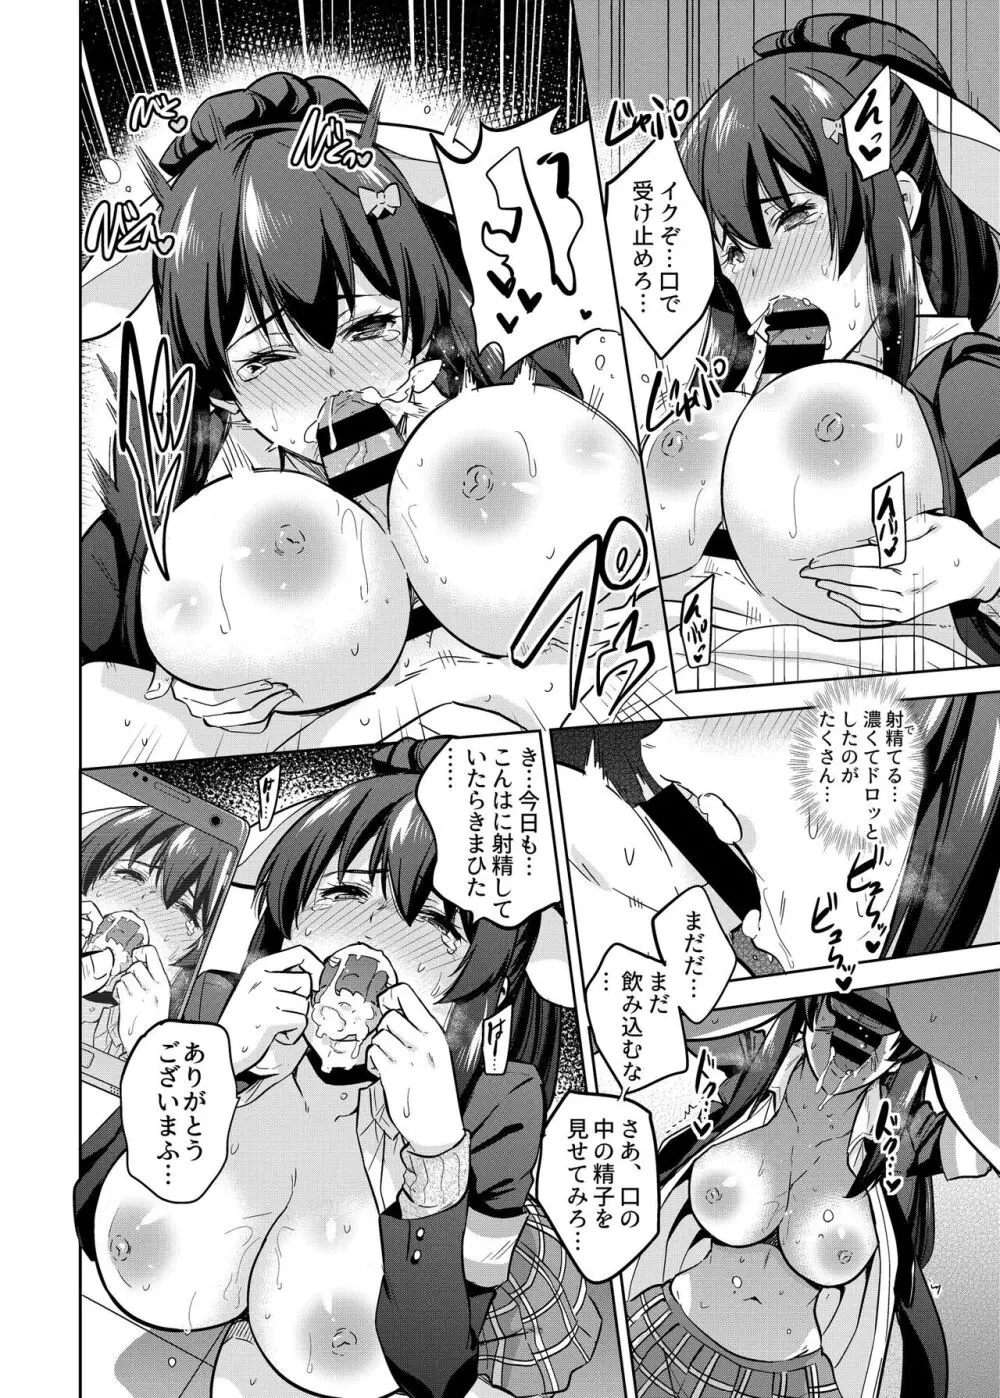 SNS 生徒会役員を寝撮ってシェアする話。2 - page5